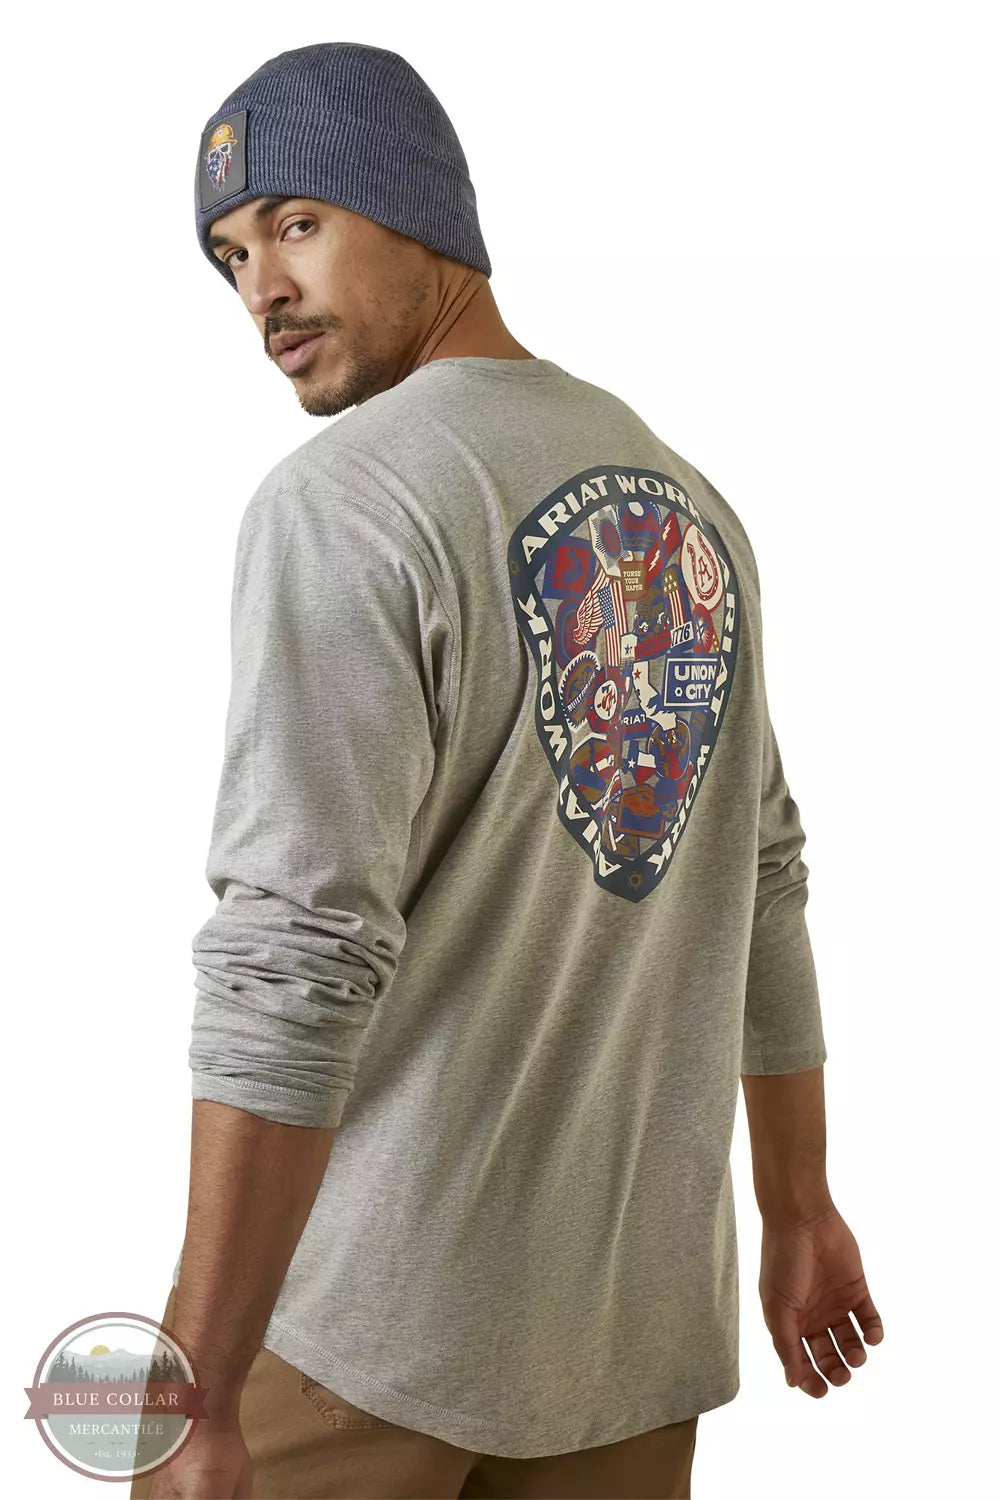  Ariat 10046351 Rebar Workman Patches Long Sleeve T-Shirt in Heather Grey Back View